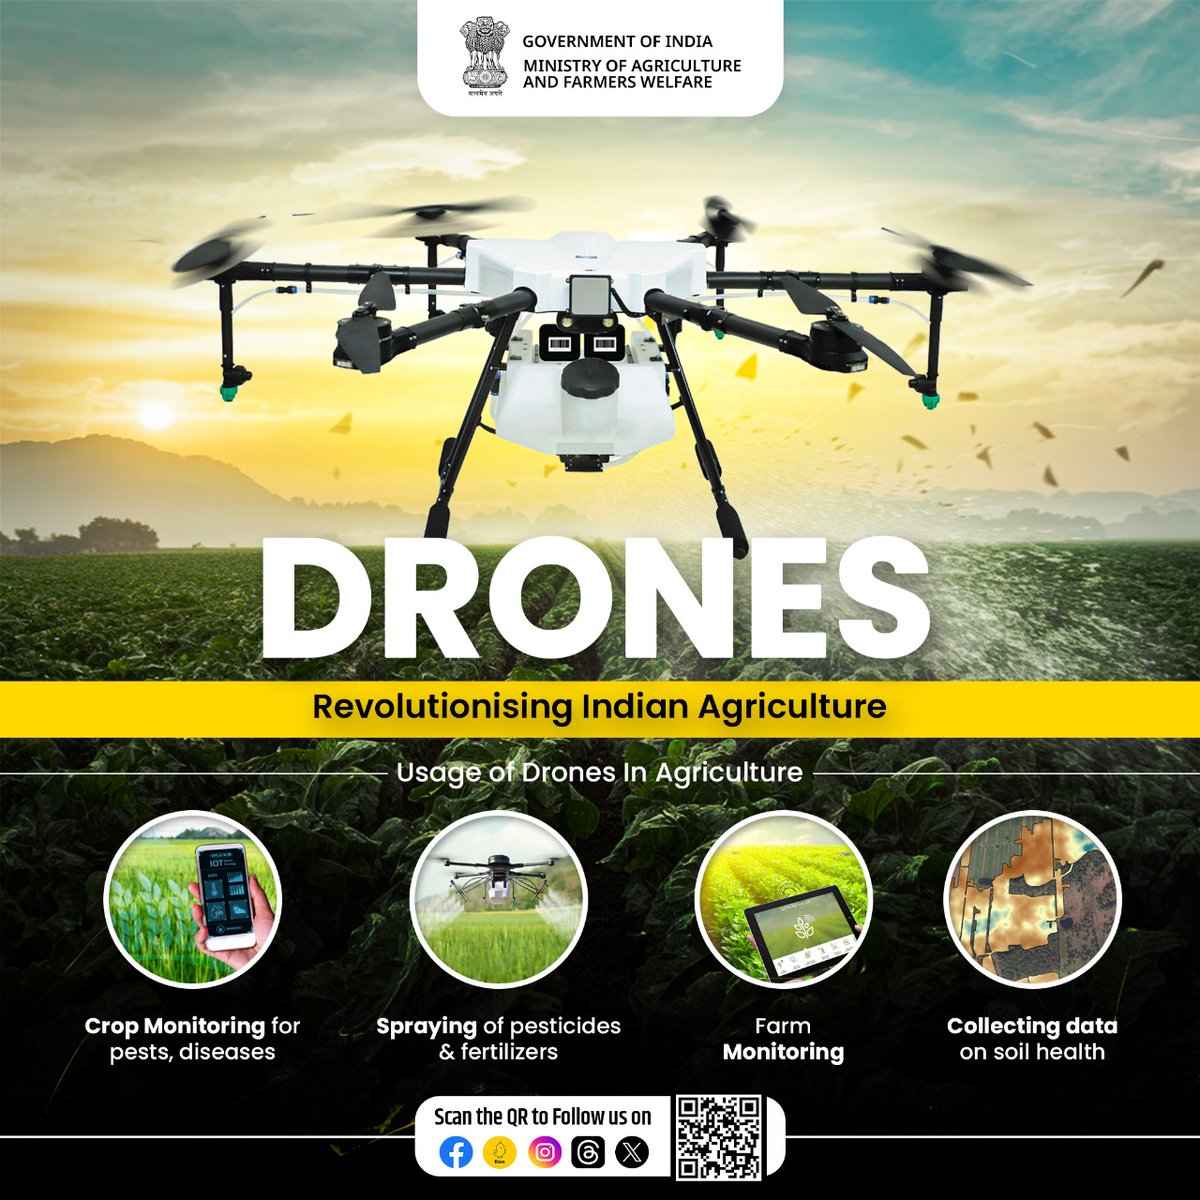 Transforming Indian #Agriculture with #DroneTechnology! Drone technology in #agriculture offers precision monitoring and management with spraying of #pesticides & chemical fertilizers, farm monitoring & other uses, enabling #farmers to optimize crop health & increased yield.